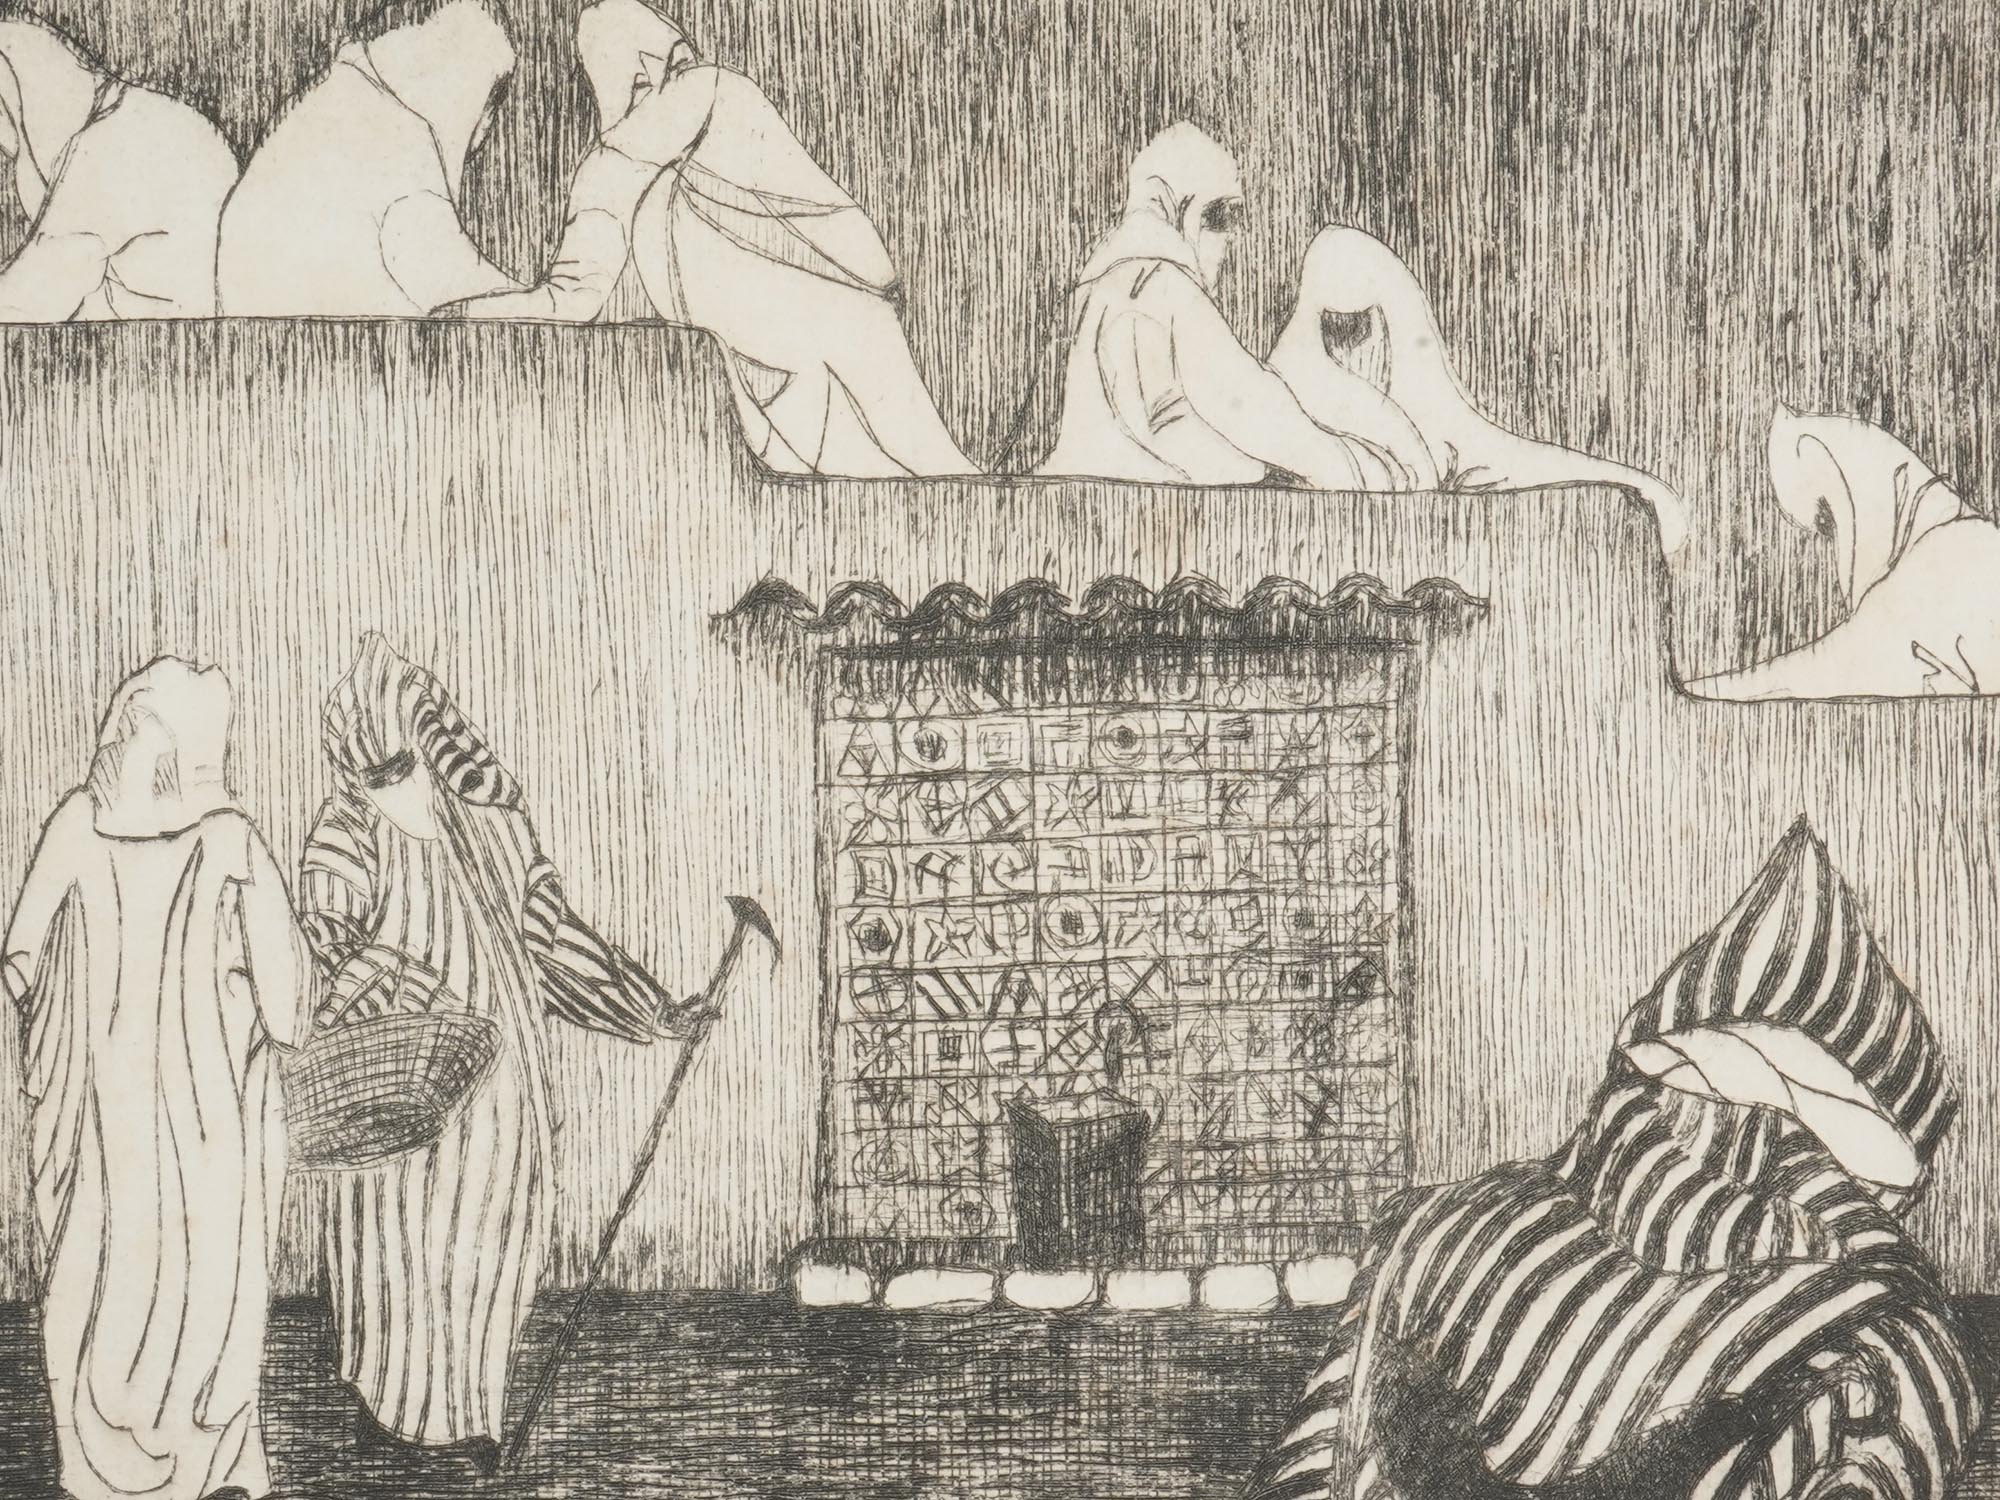 FIVE ETCHINGS, FLORENCE TANGIER, R. RIGGLE, 1950S PIC-9